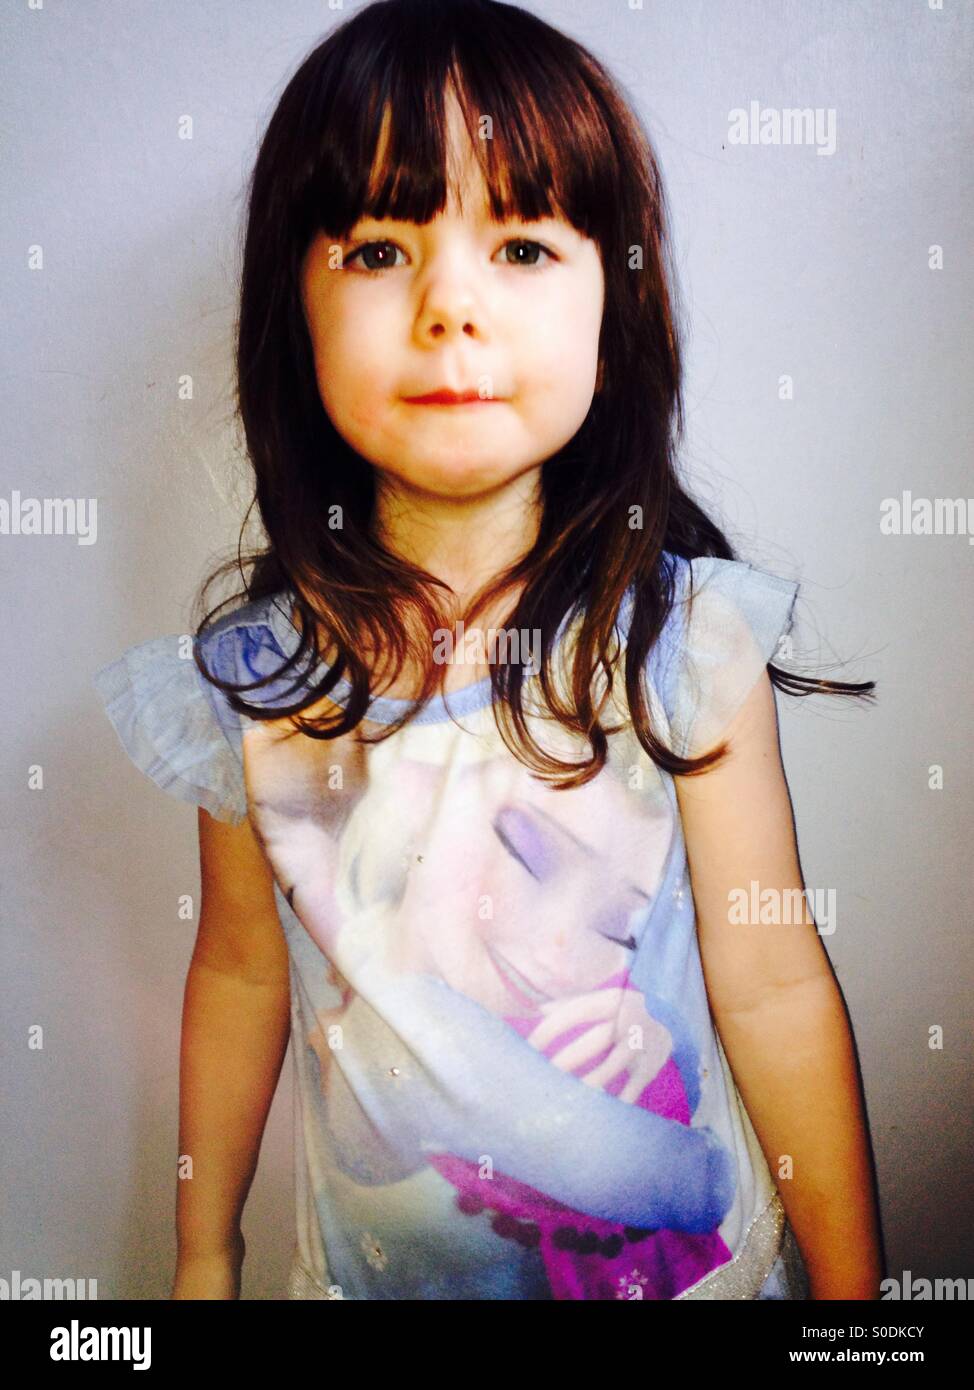 3-year old girl wearing a Frozen T-Shirt Stock Photo